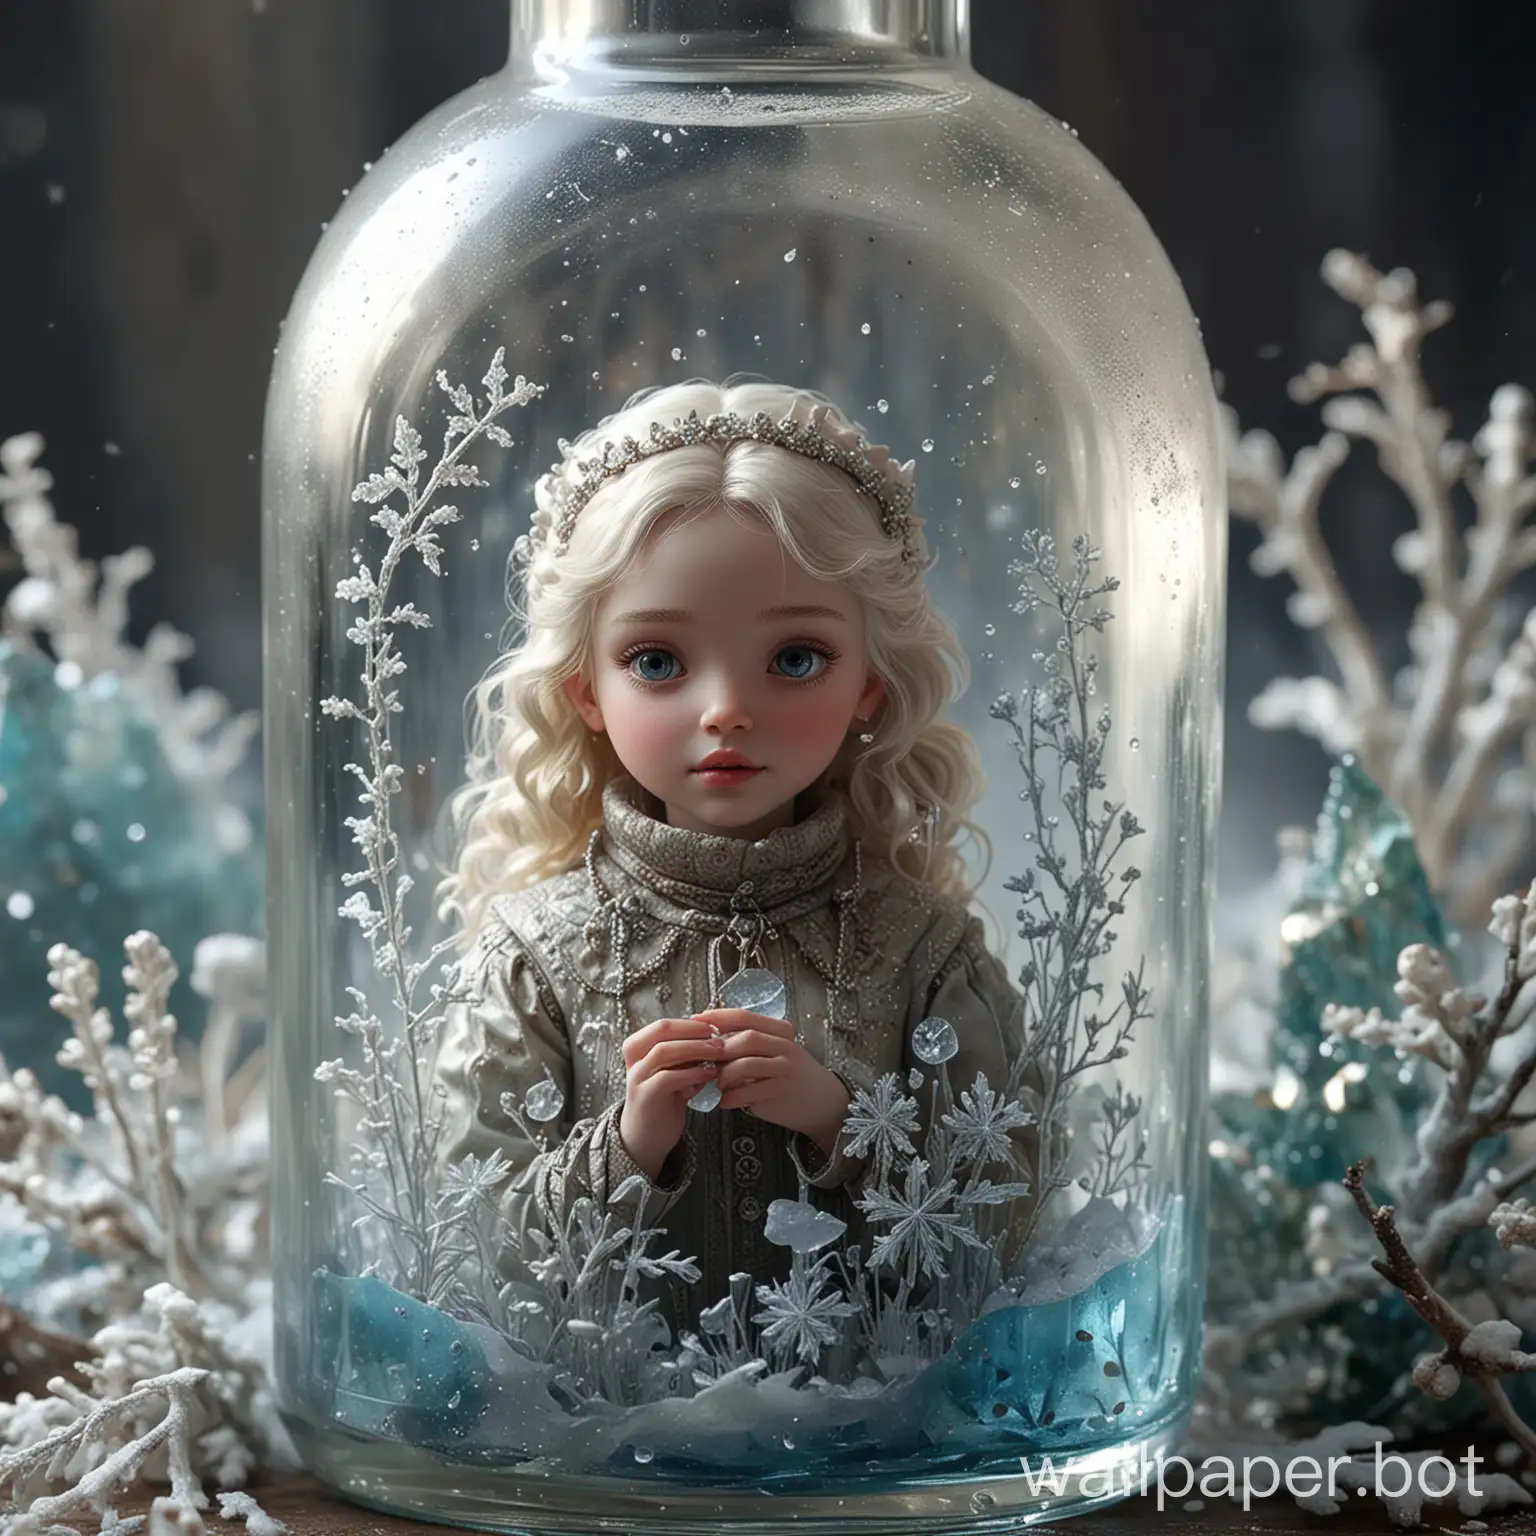 Magical-Icy-Kingdom-Vintage-Bottle-with-Crystal-Creatures